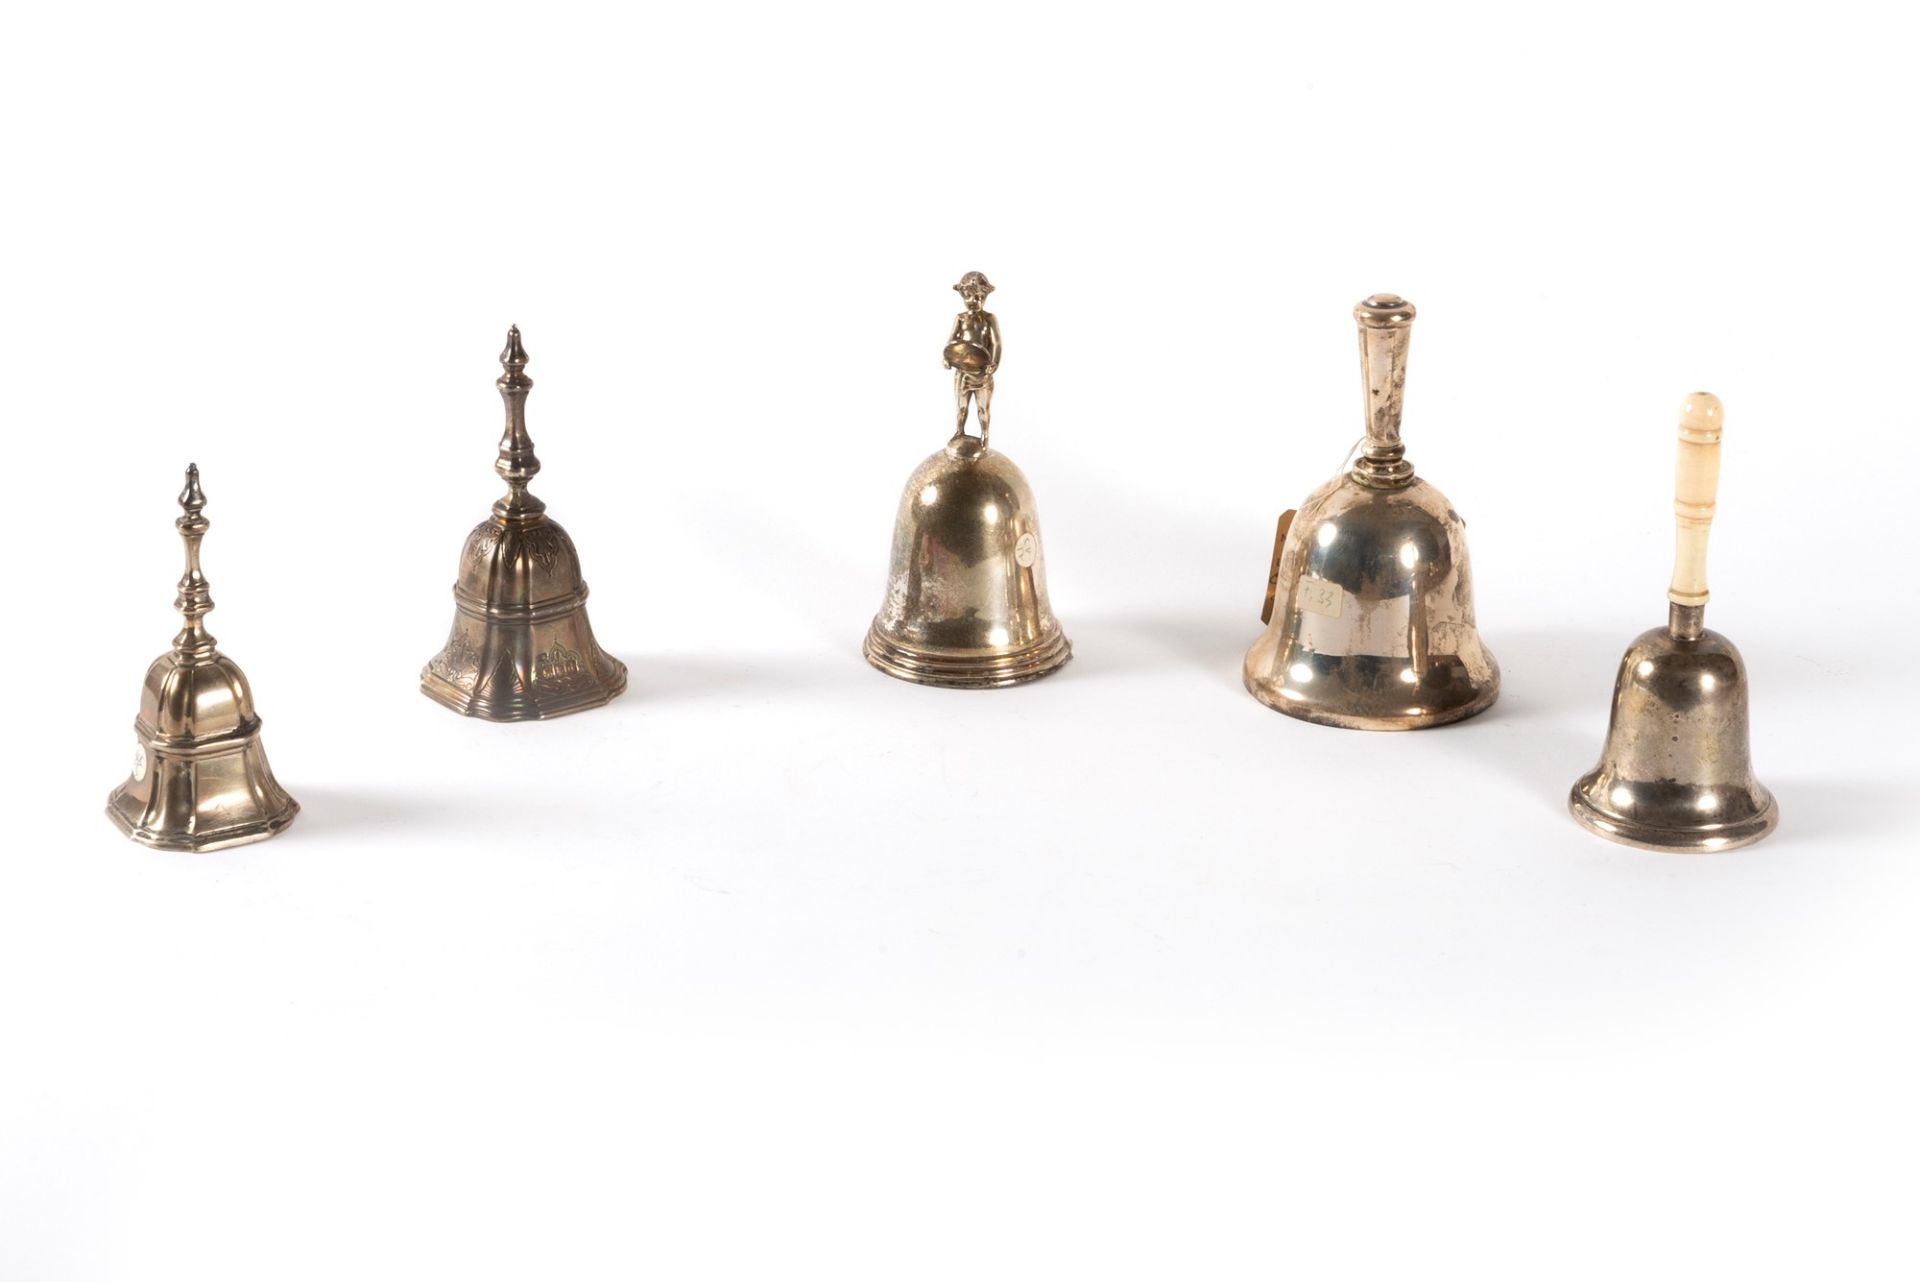 Lot consisting of five silver bells, England 19th-20th centuries